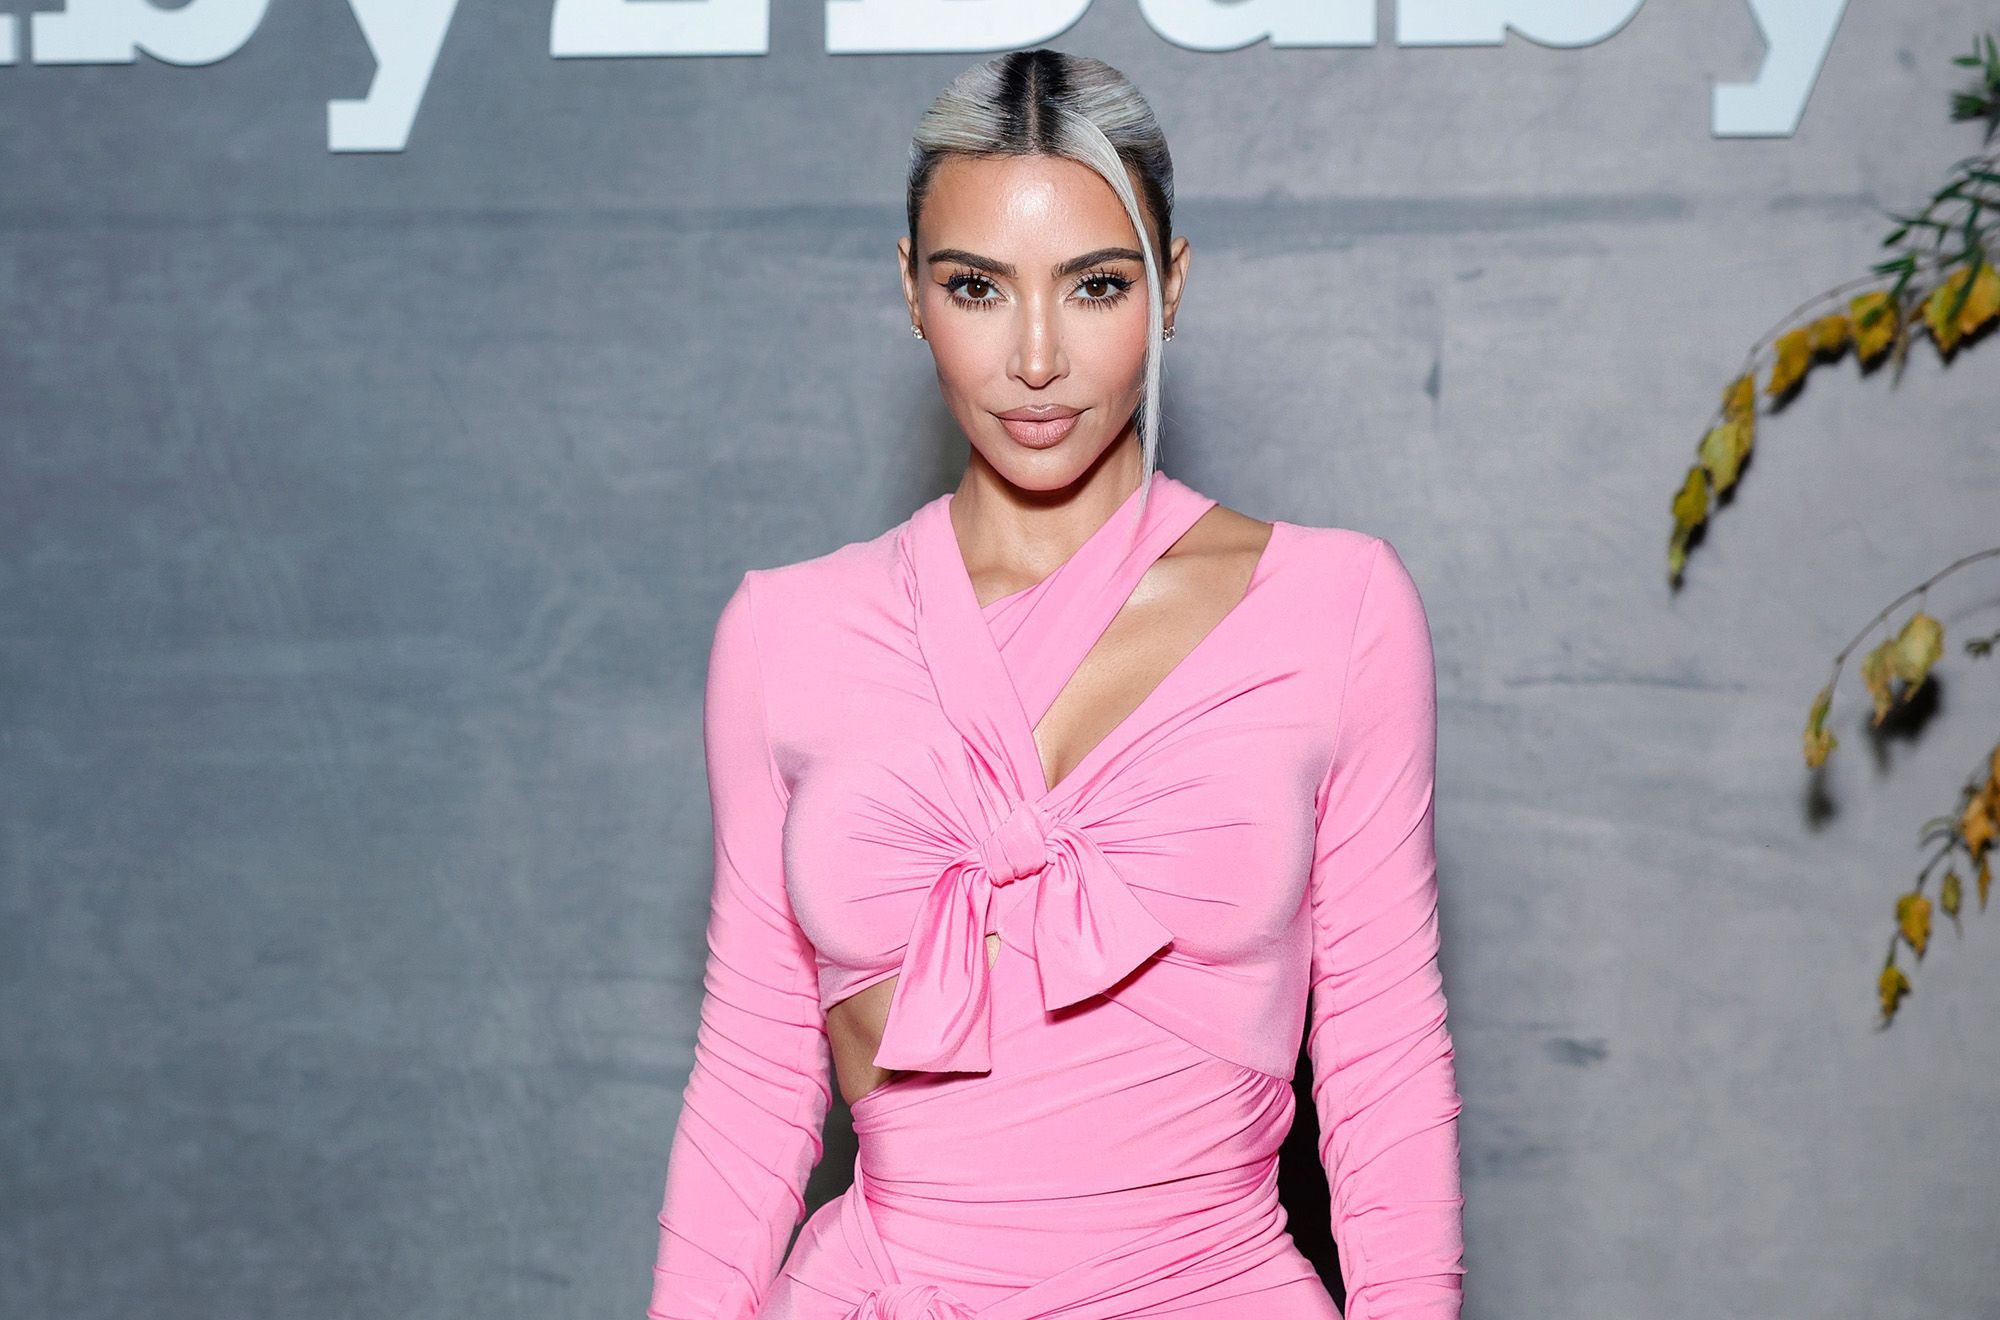 Kim Kardashian Is Bringing Back One of the Most Divisive Bag